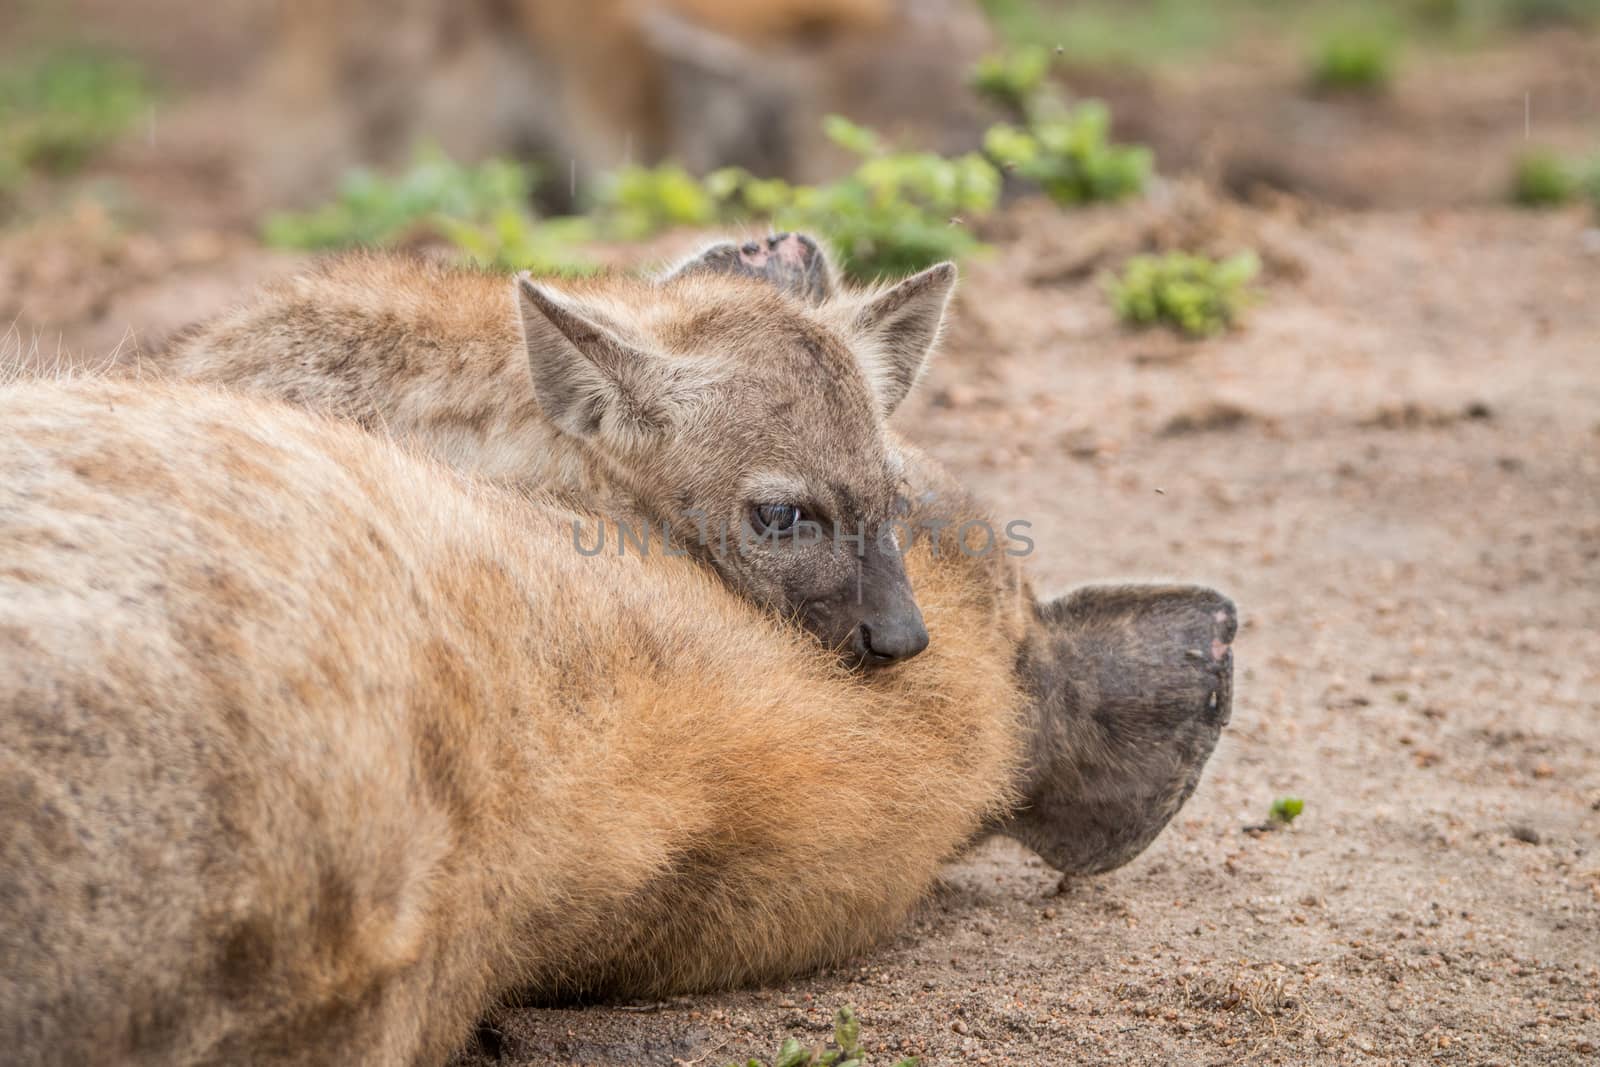 Spotted hyena mother with cub in the Kruger National Park, South Africa.